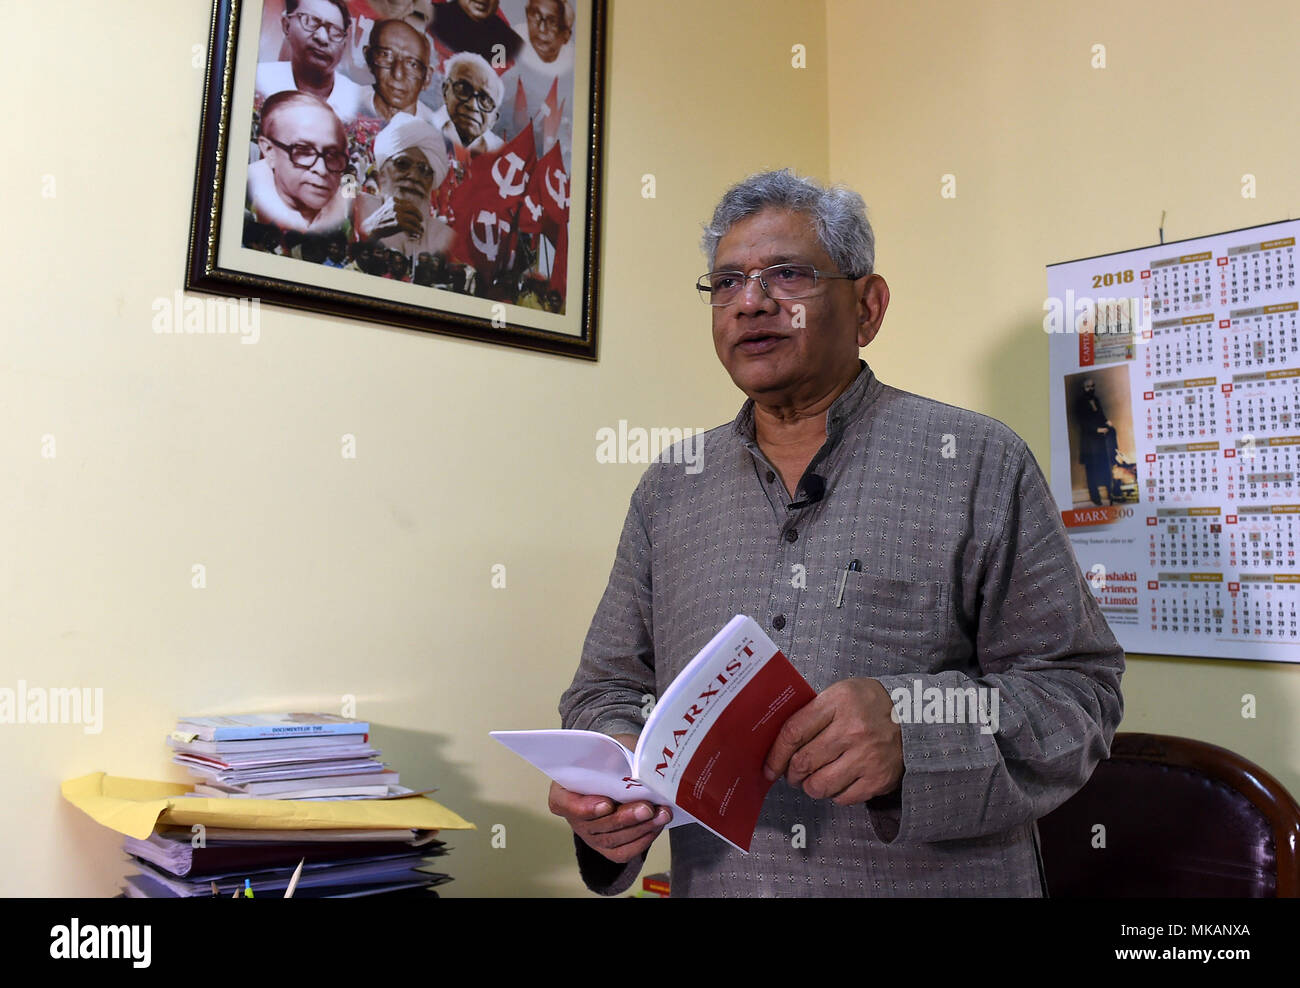 New Delhi. 8th Apr, 2018. Sitaram Yechury, general secretary of the Communist Party of India (Marxists) receives an interview in India's capital New Delhi April 8, 2018. Marxism is a guiding philosophy in any country where struggle is going on against exploitation, and the philosophy continues to be active in India, said Sitaram Yechury in a recent exclusive interview with Xinhua. Credit: Zhang Naijie/Xinhua/Alamy Live News Stock Photo